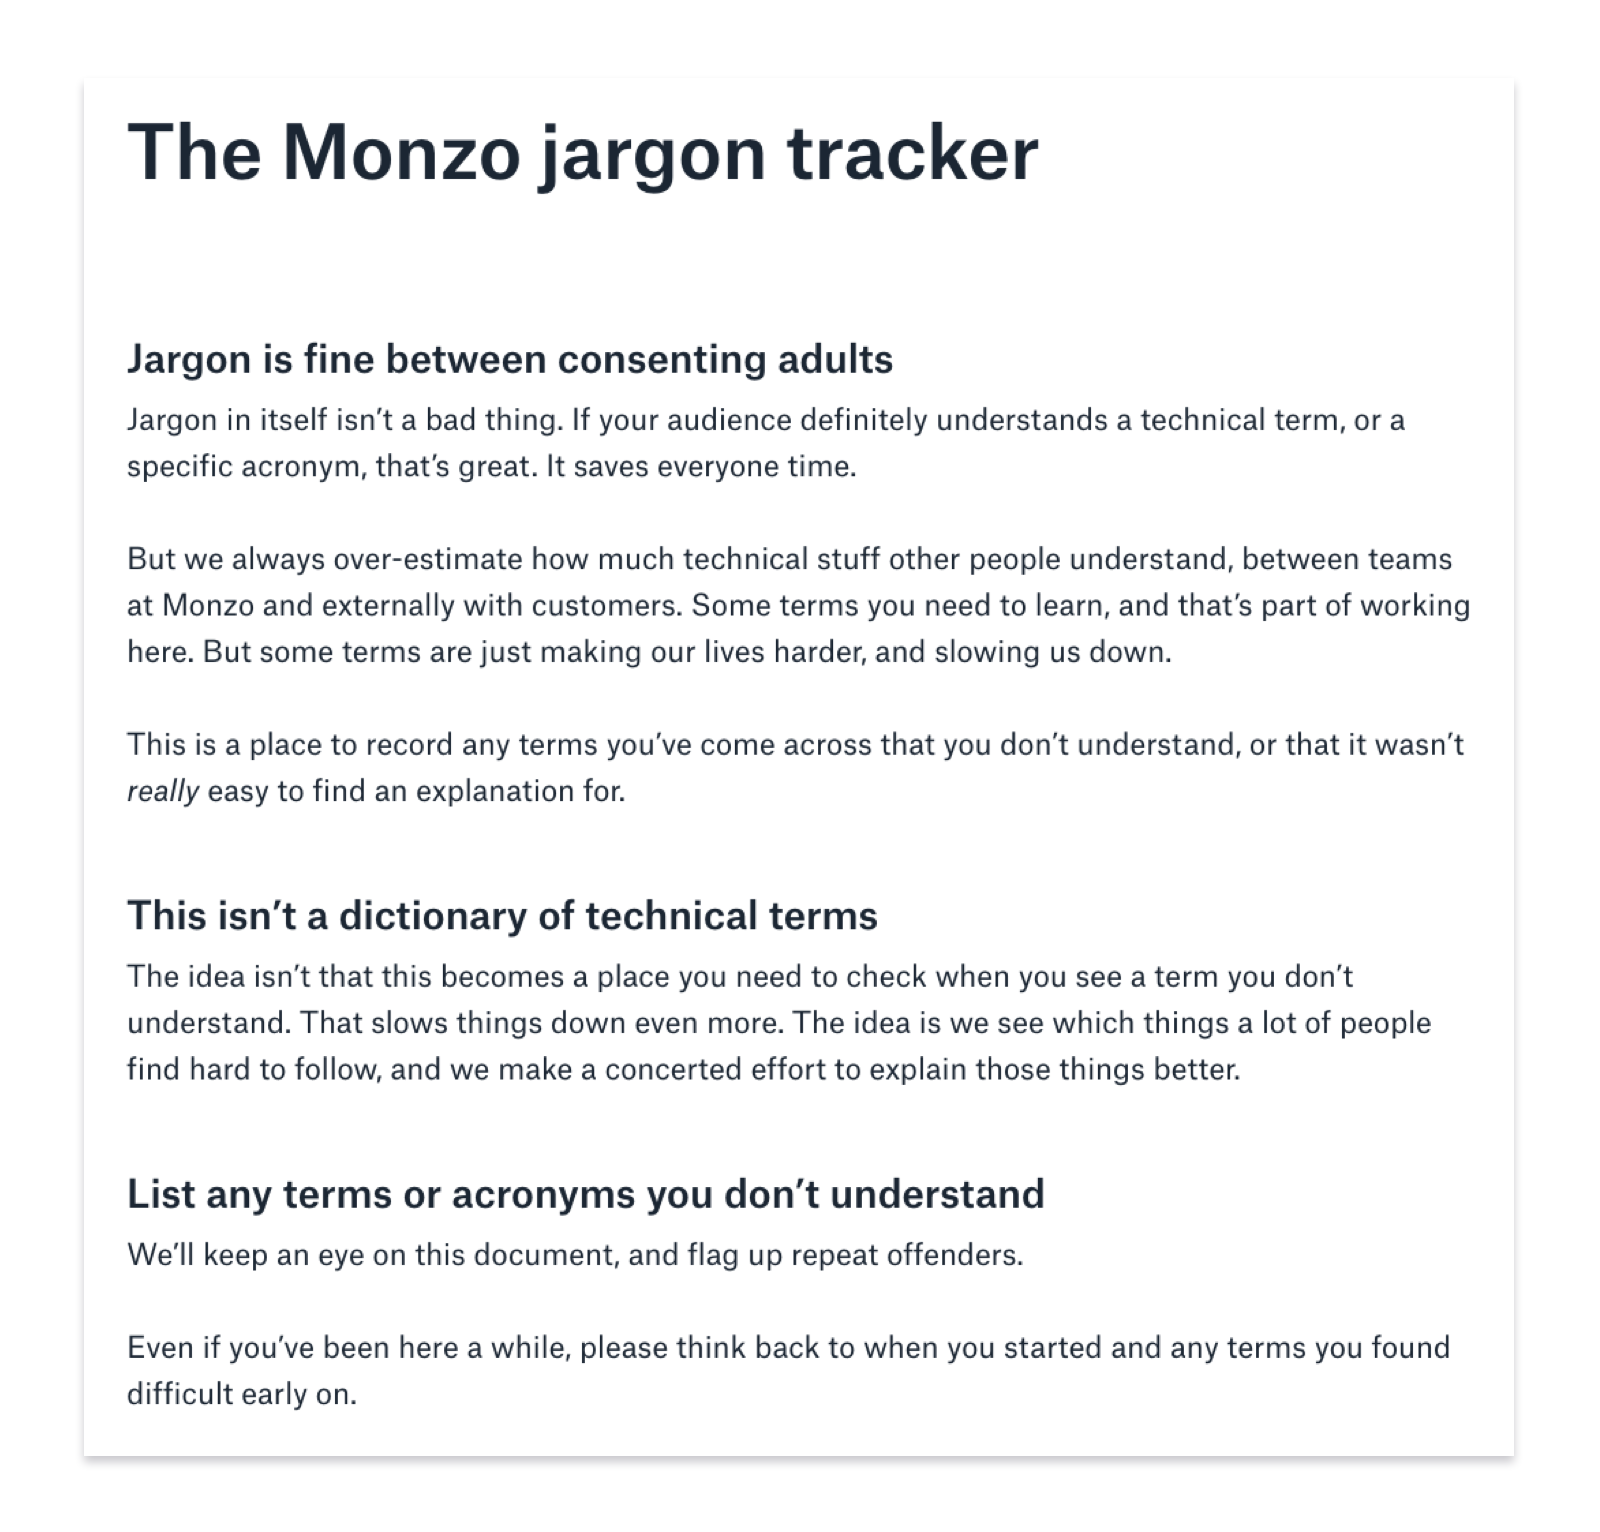 The Monzo jargon tracker. Jargon is fine between consenting adults. Jargon in itself isn’t a bad thing. If your audience definitely understands a technical term, or a specific acronym, that’s great. It saves everyone time. But we always over-estimate how much technical stuff other people understand, between teams at Monzo and externally with customers. Some terms you need to learn, and that’s part of working here. But some terms are just making our lives harder, and slowing us down. This is a place to record any terms you’ve come across that you don’t understand, or that it wasn’t really easy to find an explanation for. This isn’t a dictionary of technical terms. The idea isn’t that this becomes a place you need to check when you see a term you don’t understand. That slows things down even more. The idea is we see which things a lot of people find hard to follow, and we make a concerted effort to explain those things better. List any terms or acronyms you don’t understand. We’ll keep an eye on this document, and flag up repeat offenders. Even if you’ve been here a while, please think back to when you started and any terms you found difficult early on.